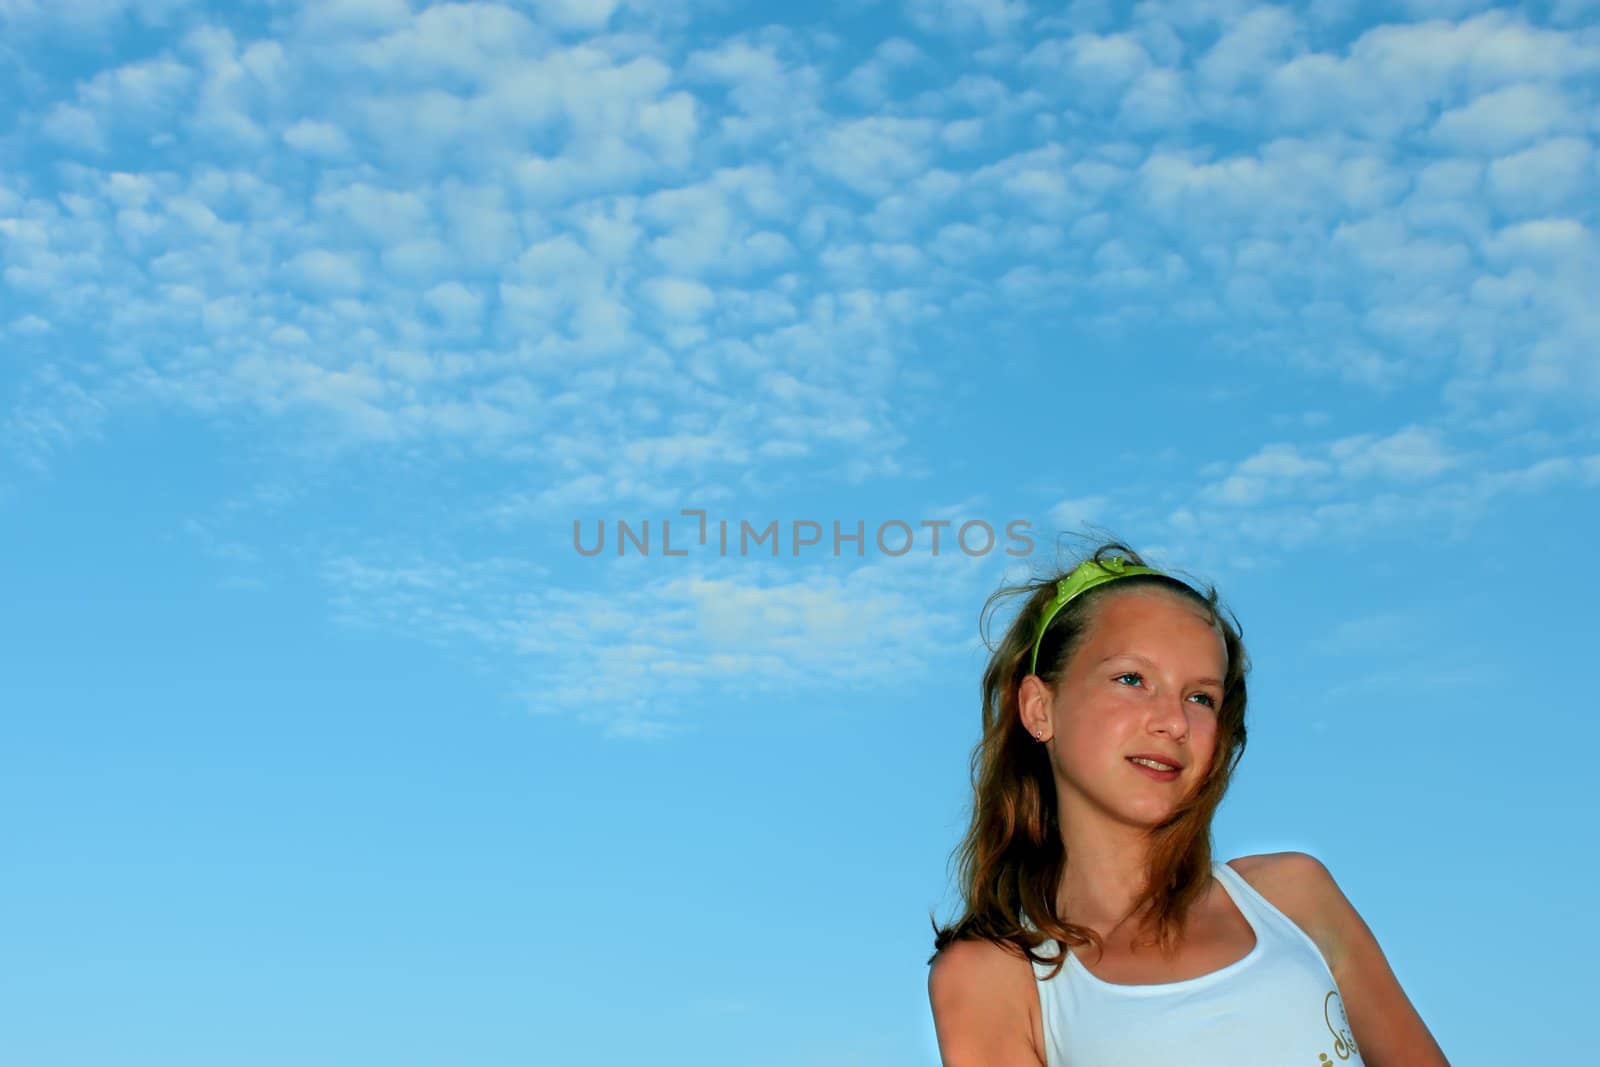 Teenage girl on the background of blue sky with clouds